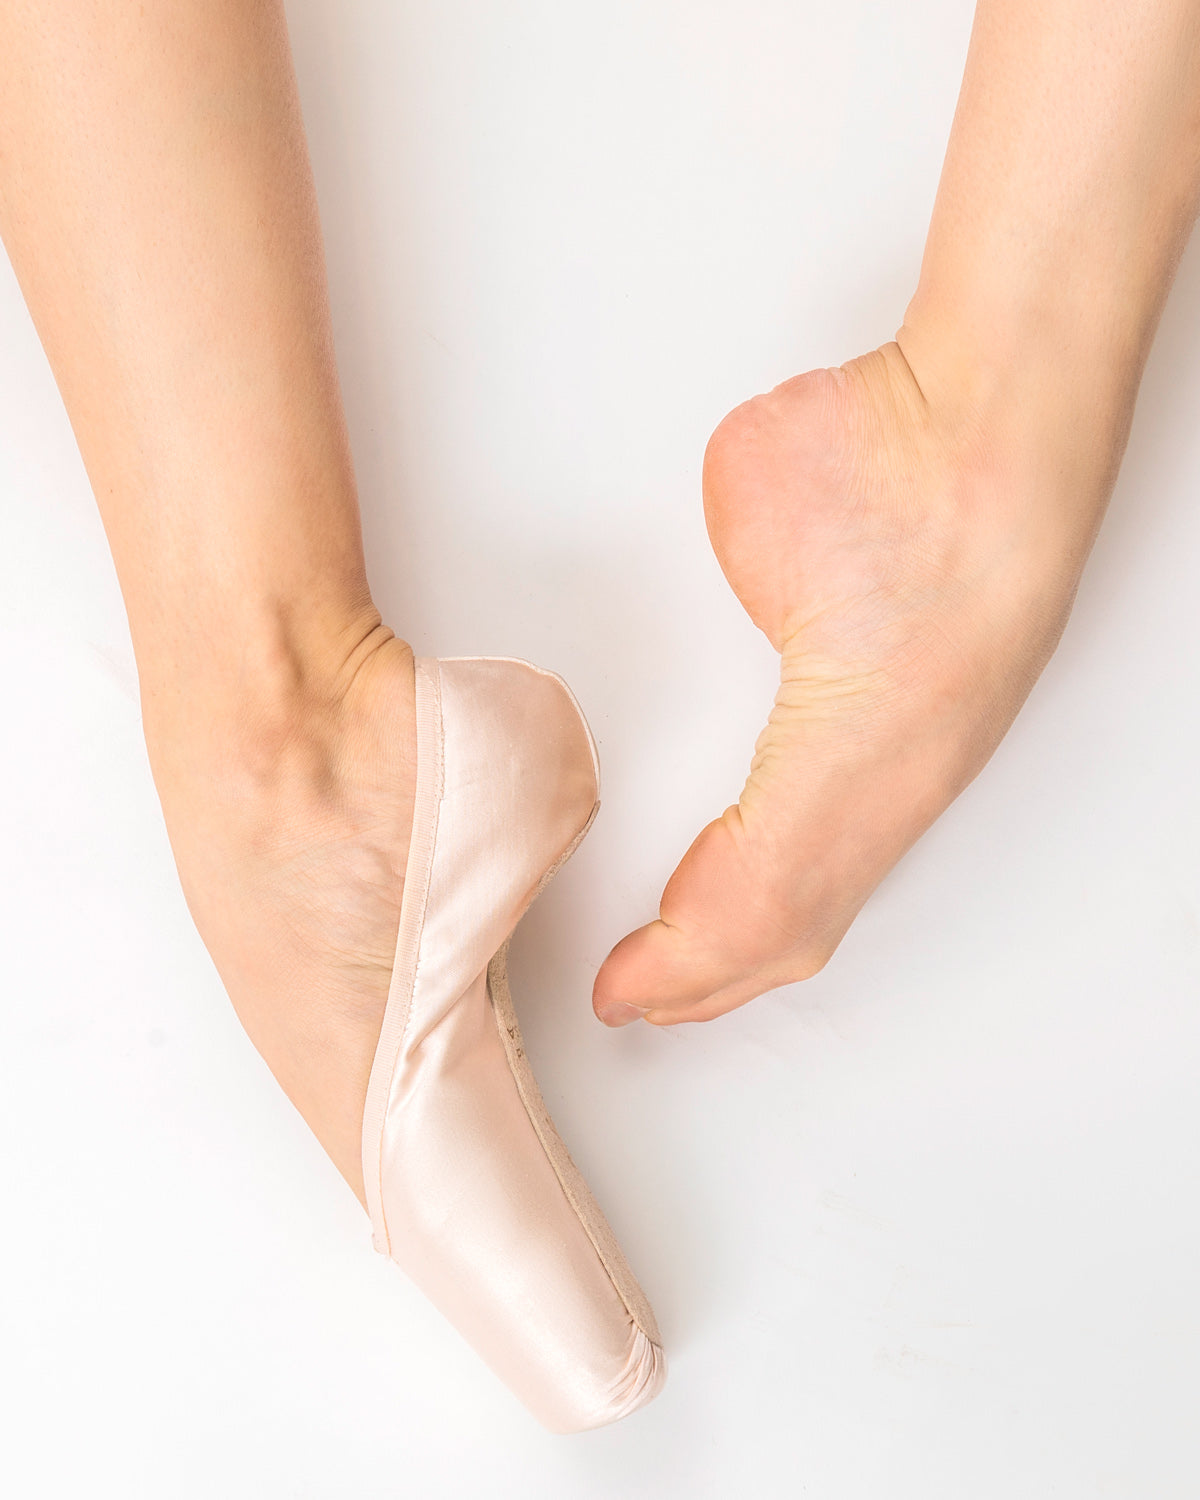 Footed Shiny Dance Tights for Dancers Jazz Latin Ballet| Intermezzo